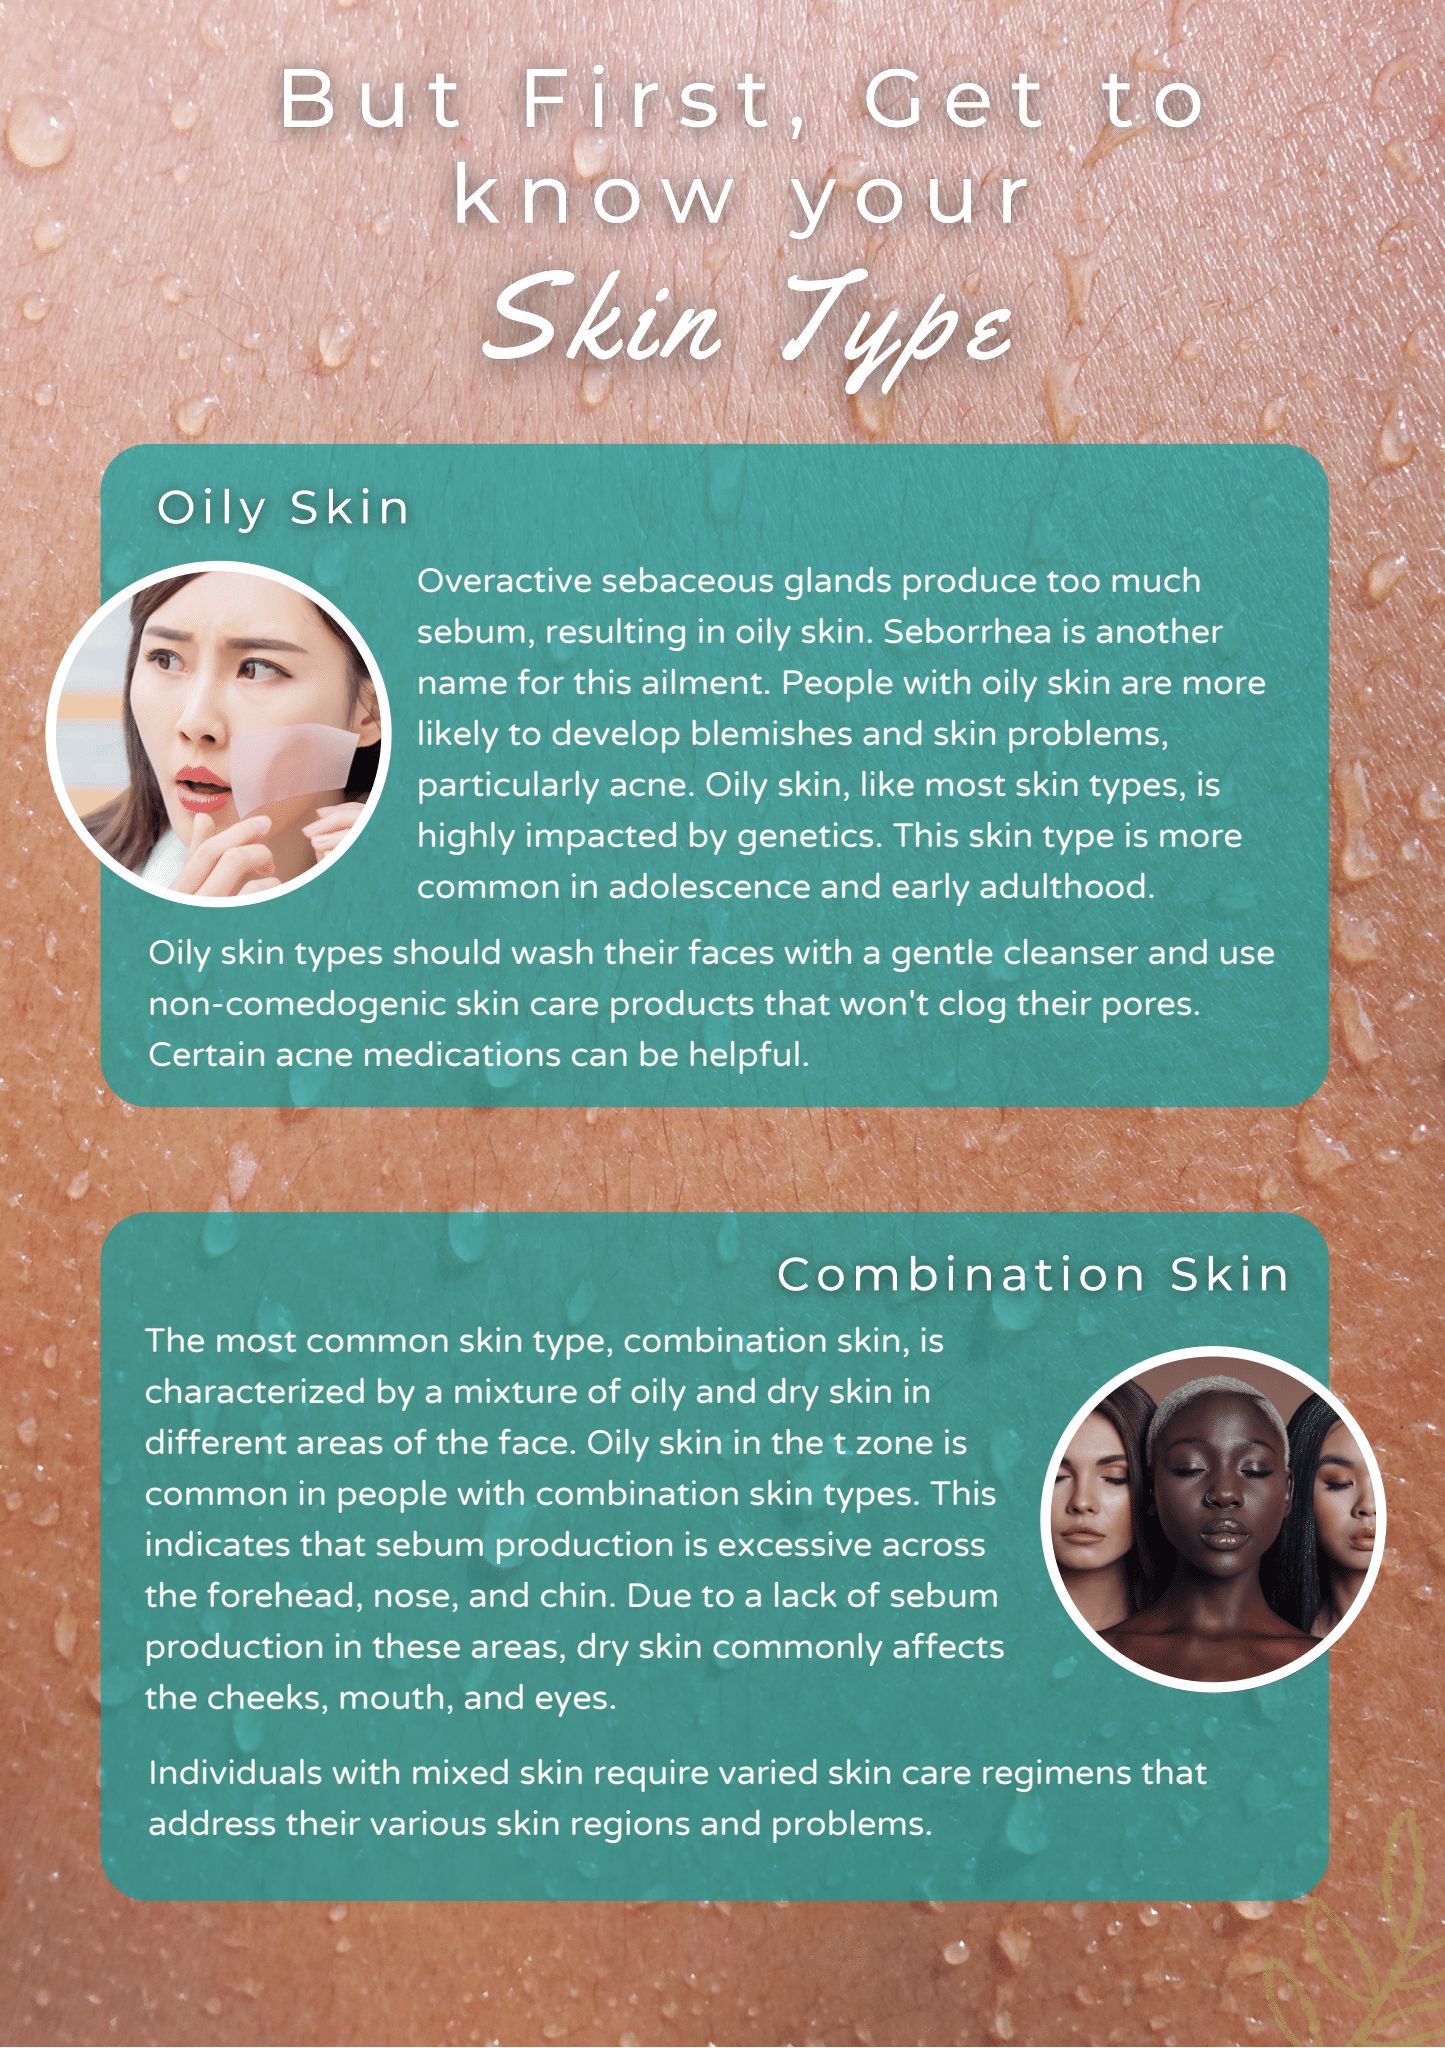 Skin types | Orland Park, IL